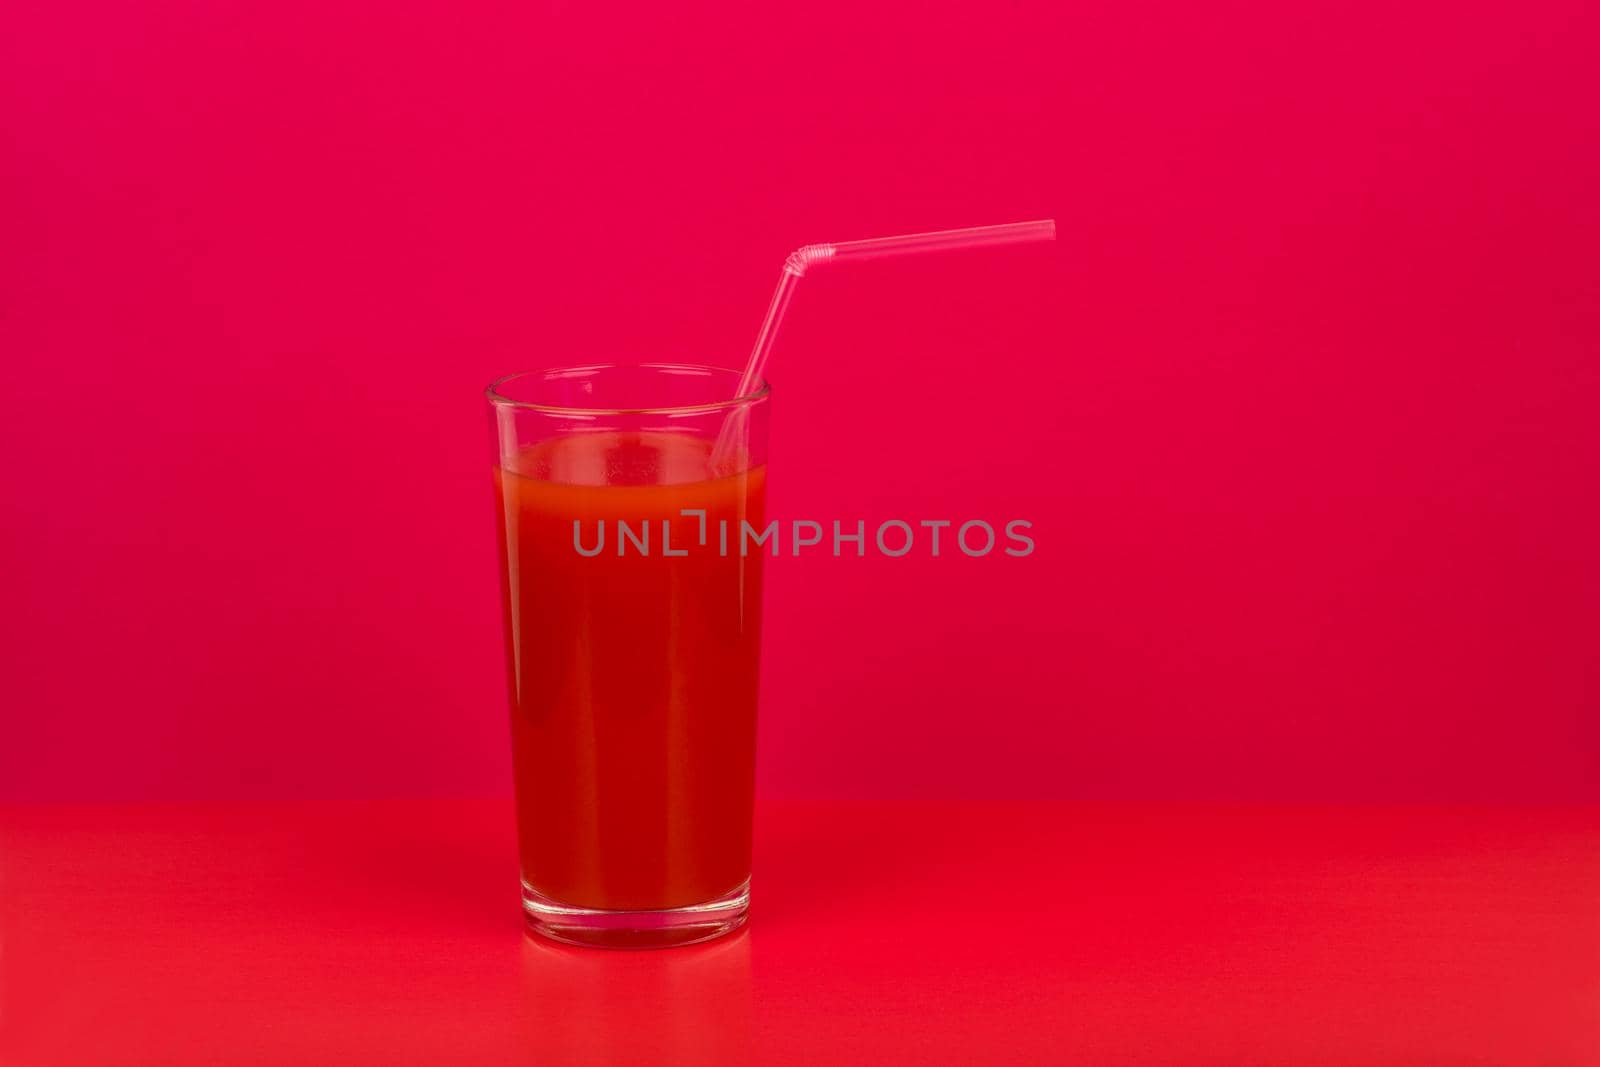 Simple still life with tomato juice in a glass with a straw against red background with a space for text. Creative concept of fresh juices and healthy lifestyle or wellbeing